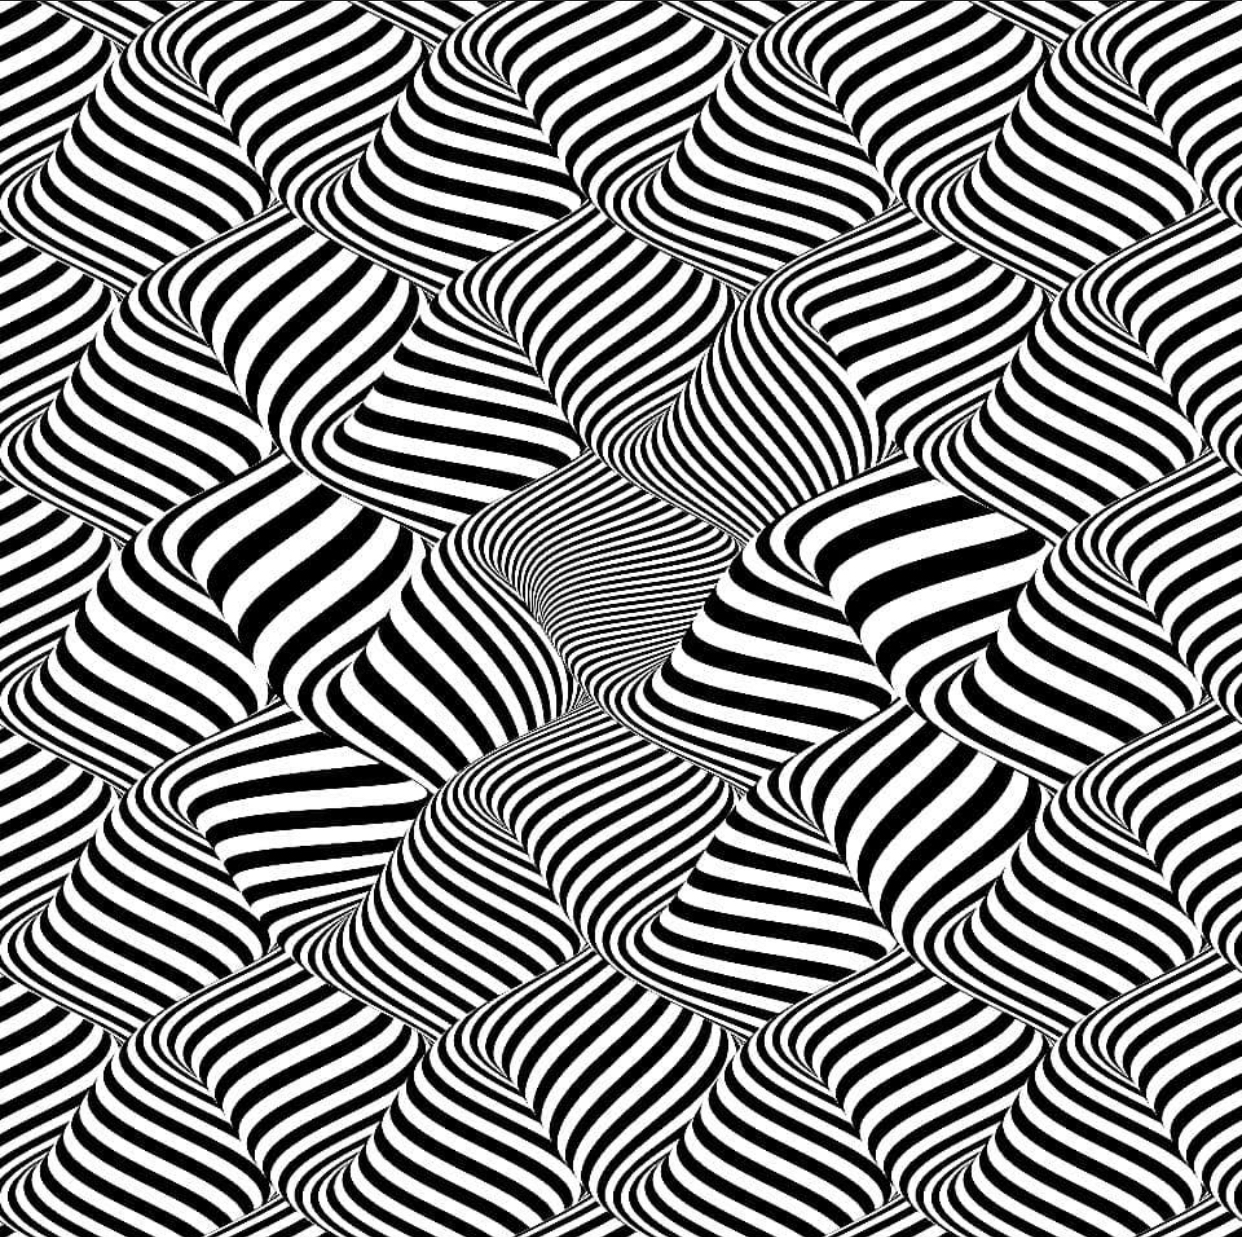 Zebra lines and texture cool shit by @manoloide on ig